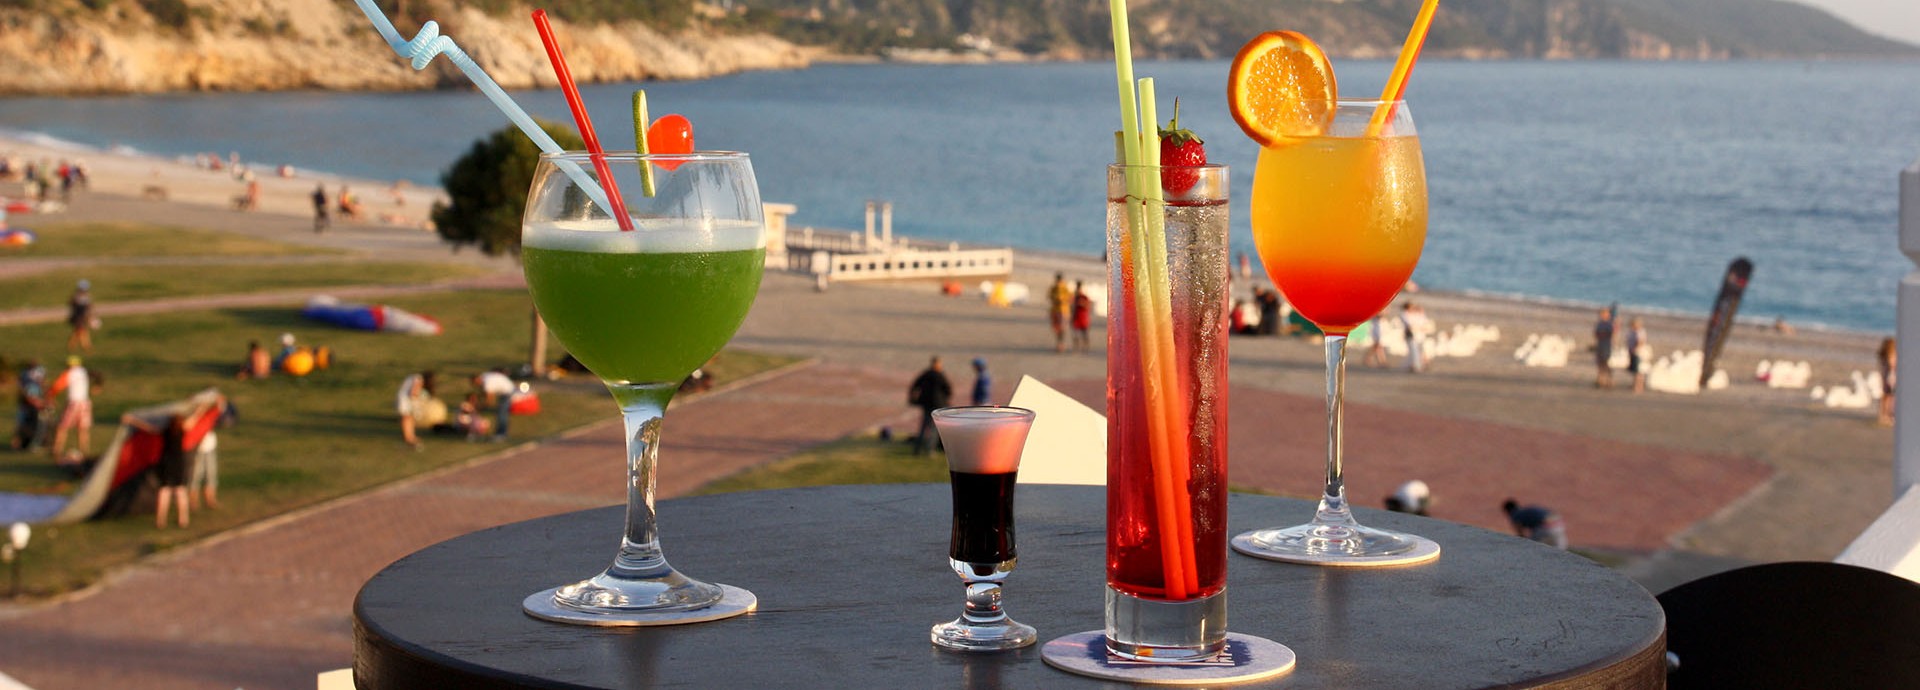 Cocktails at Harry's resturant and bar Oludeniz